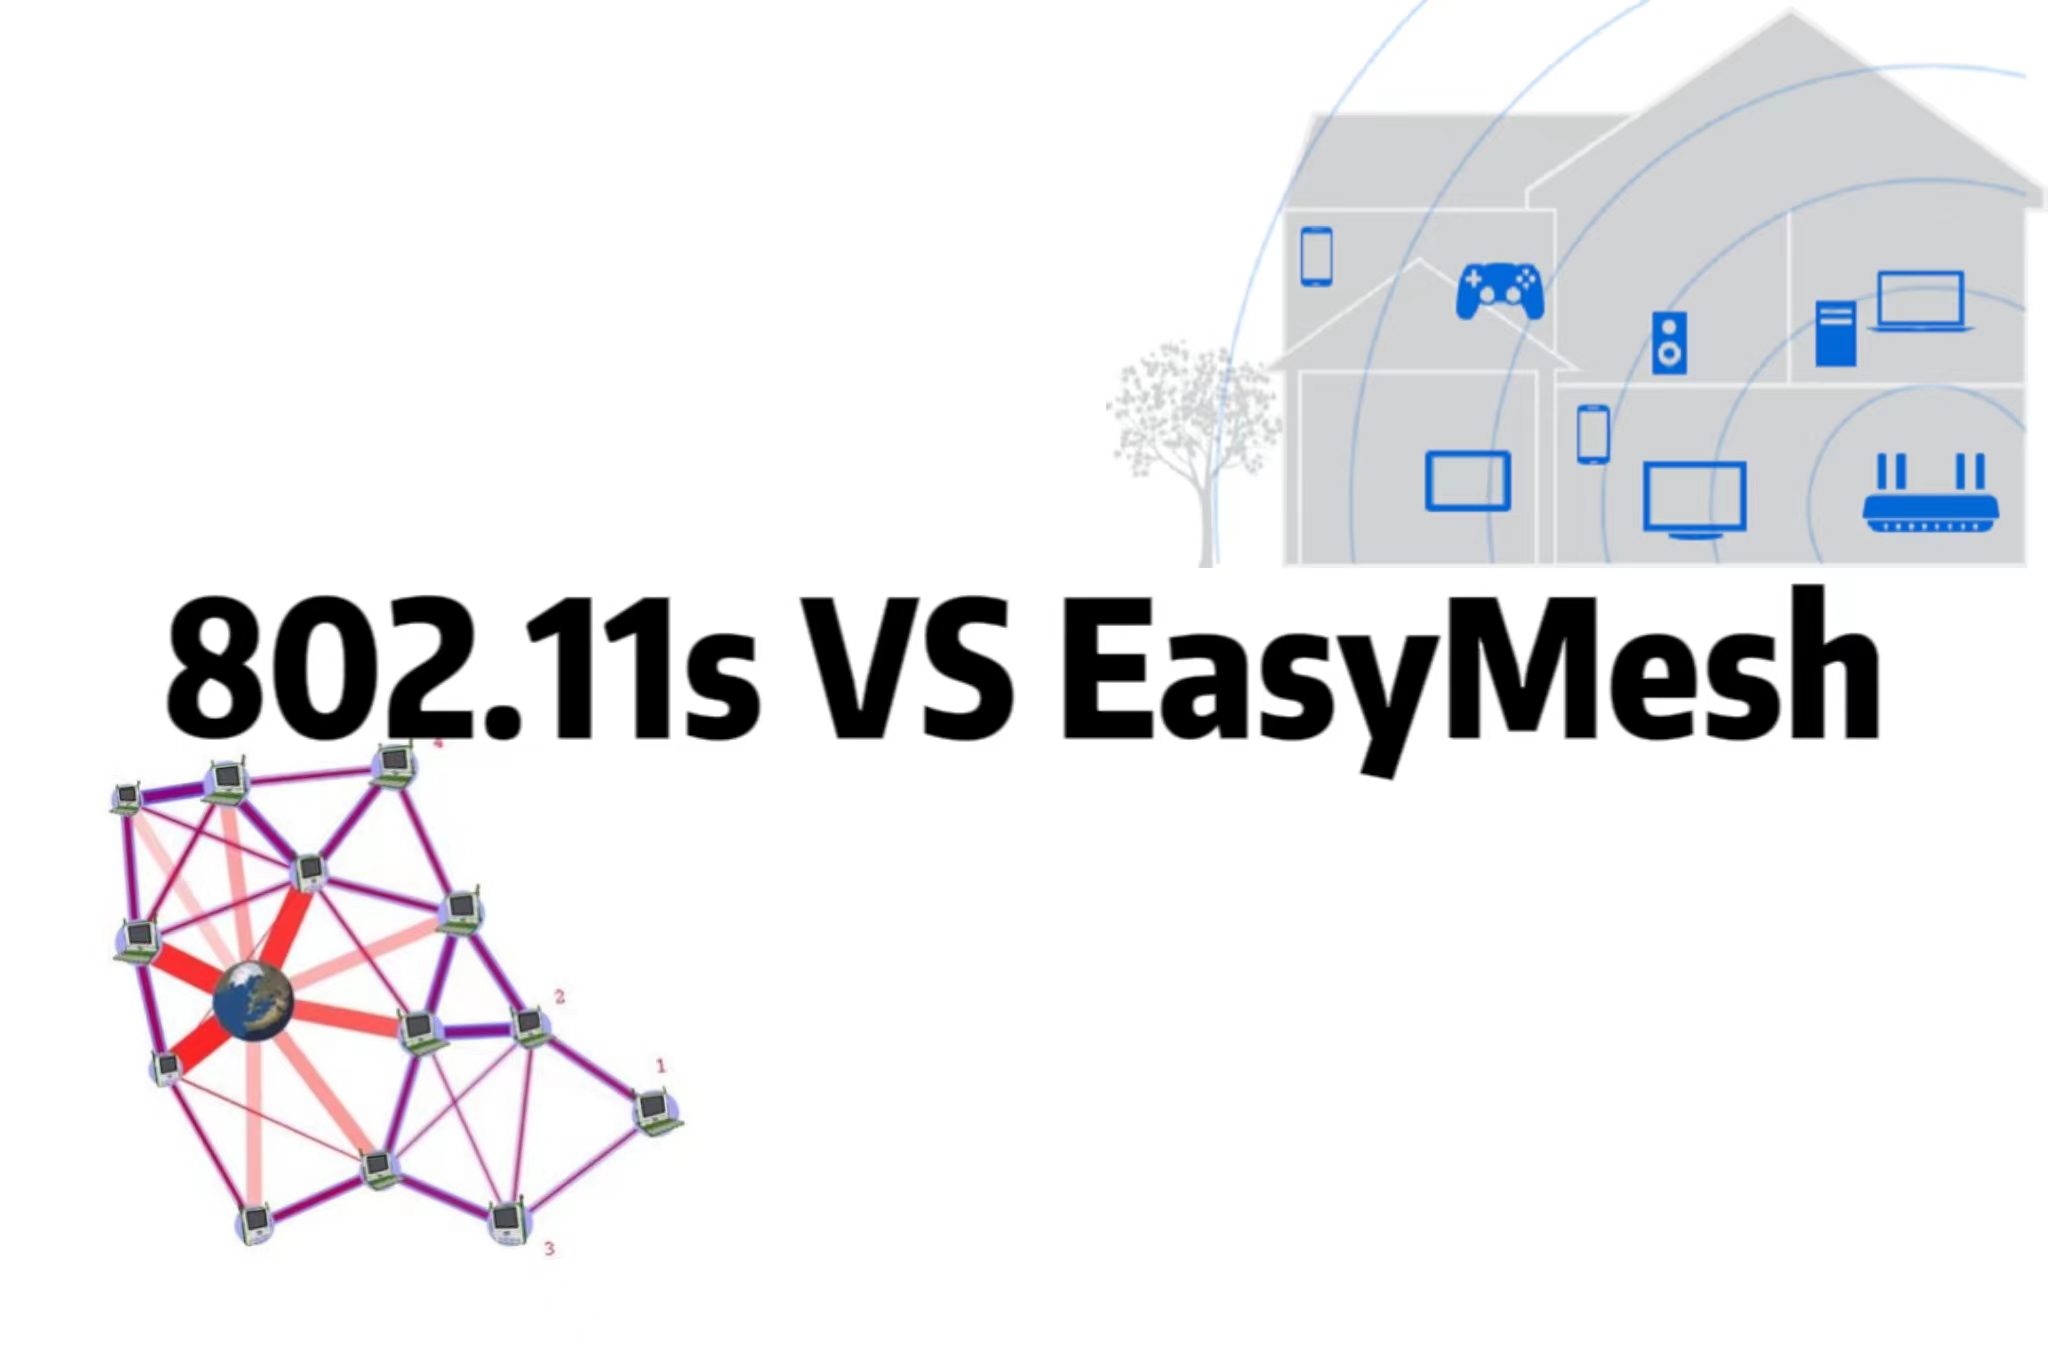 802.11s and Easymesh